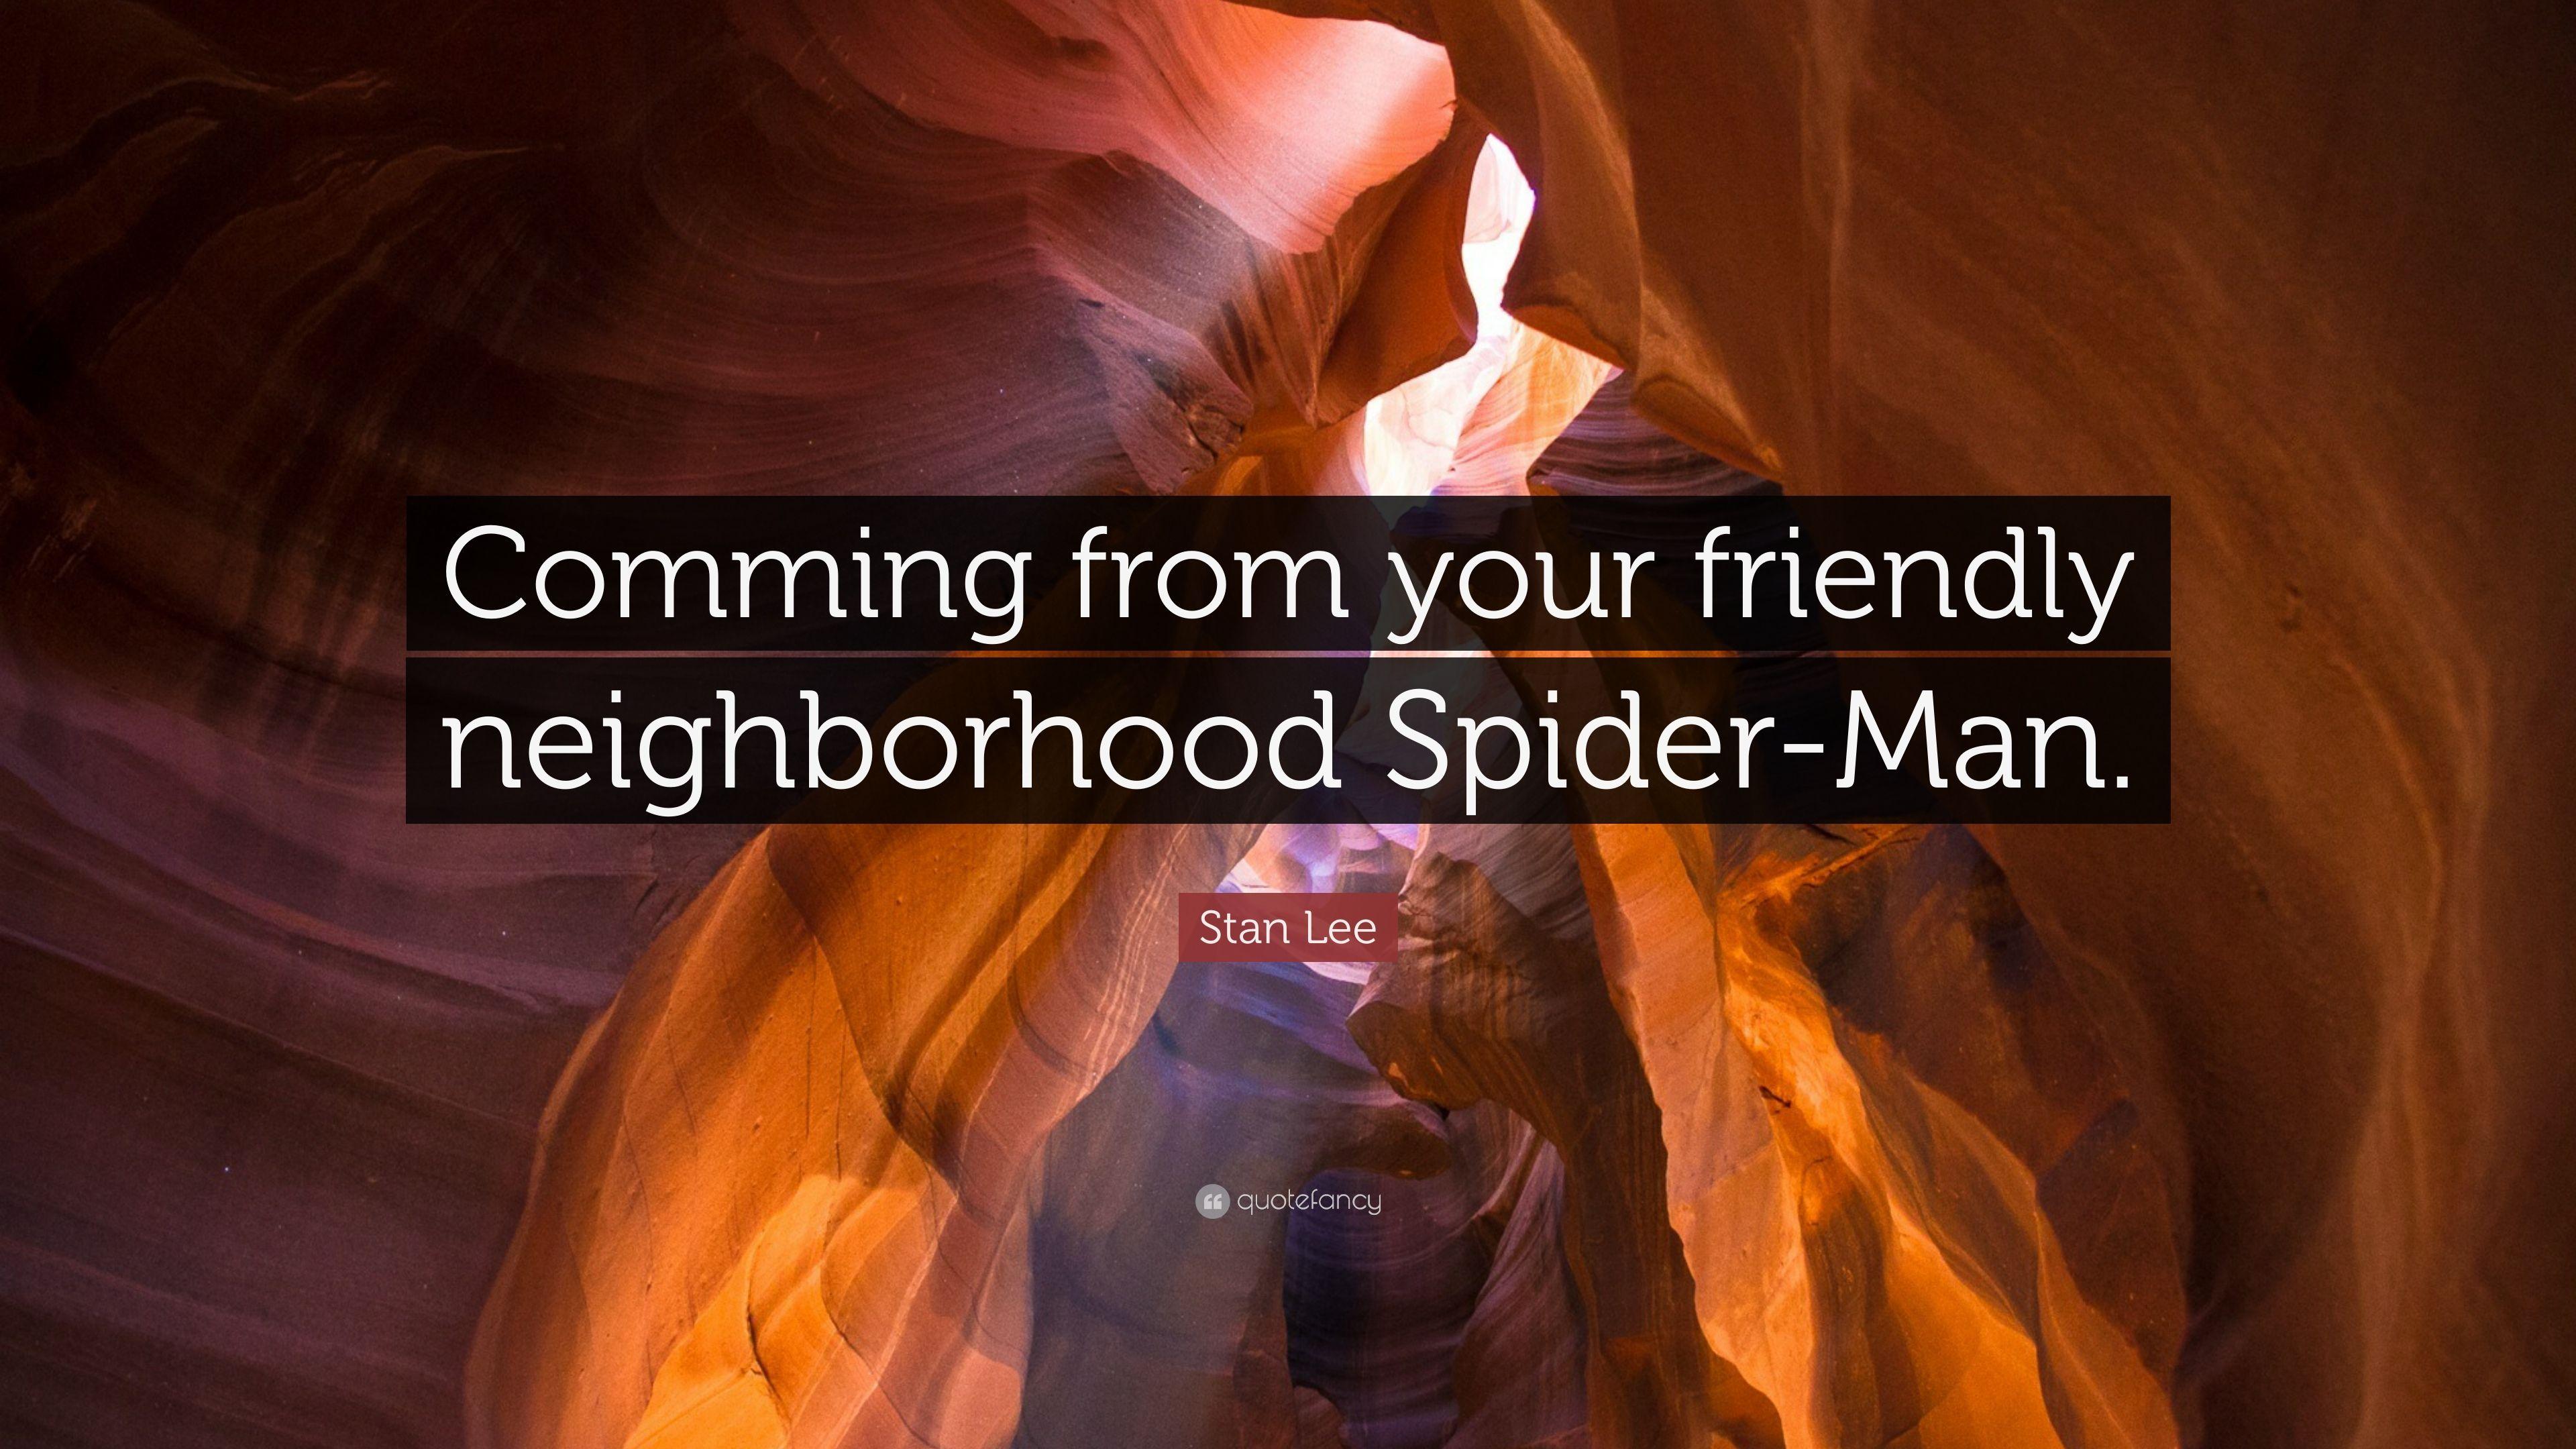 Stan Lee Quote: “Comming From Your Friendly Neighborhood Spider Man